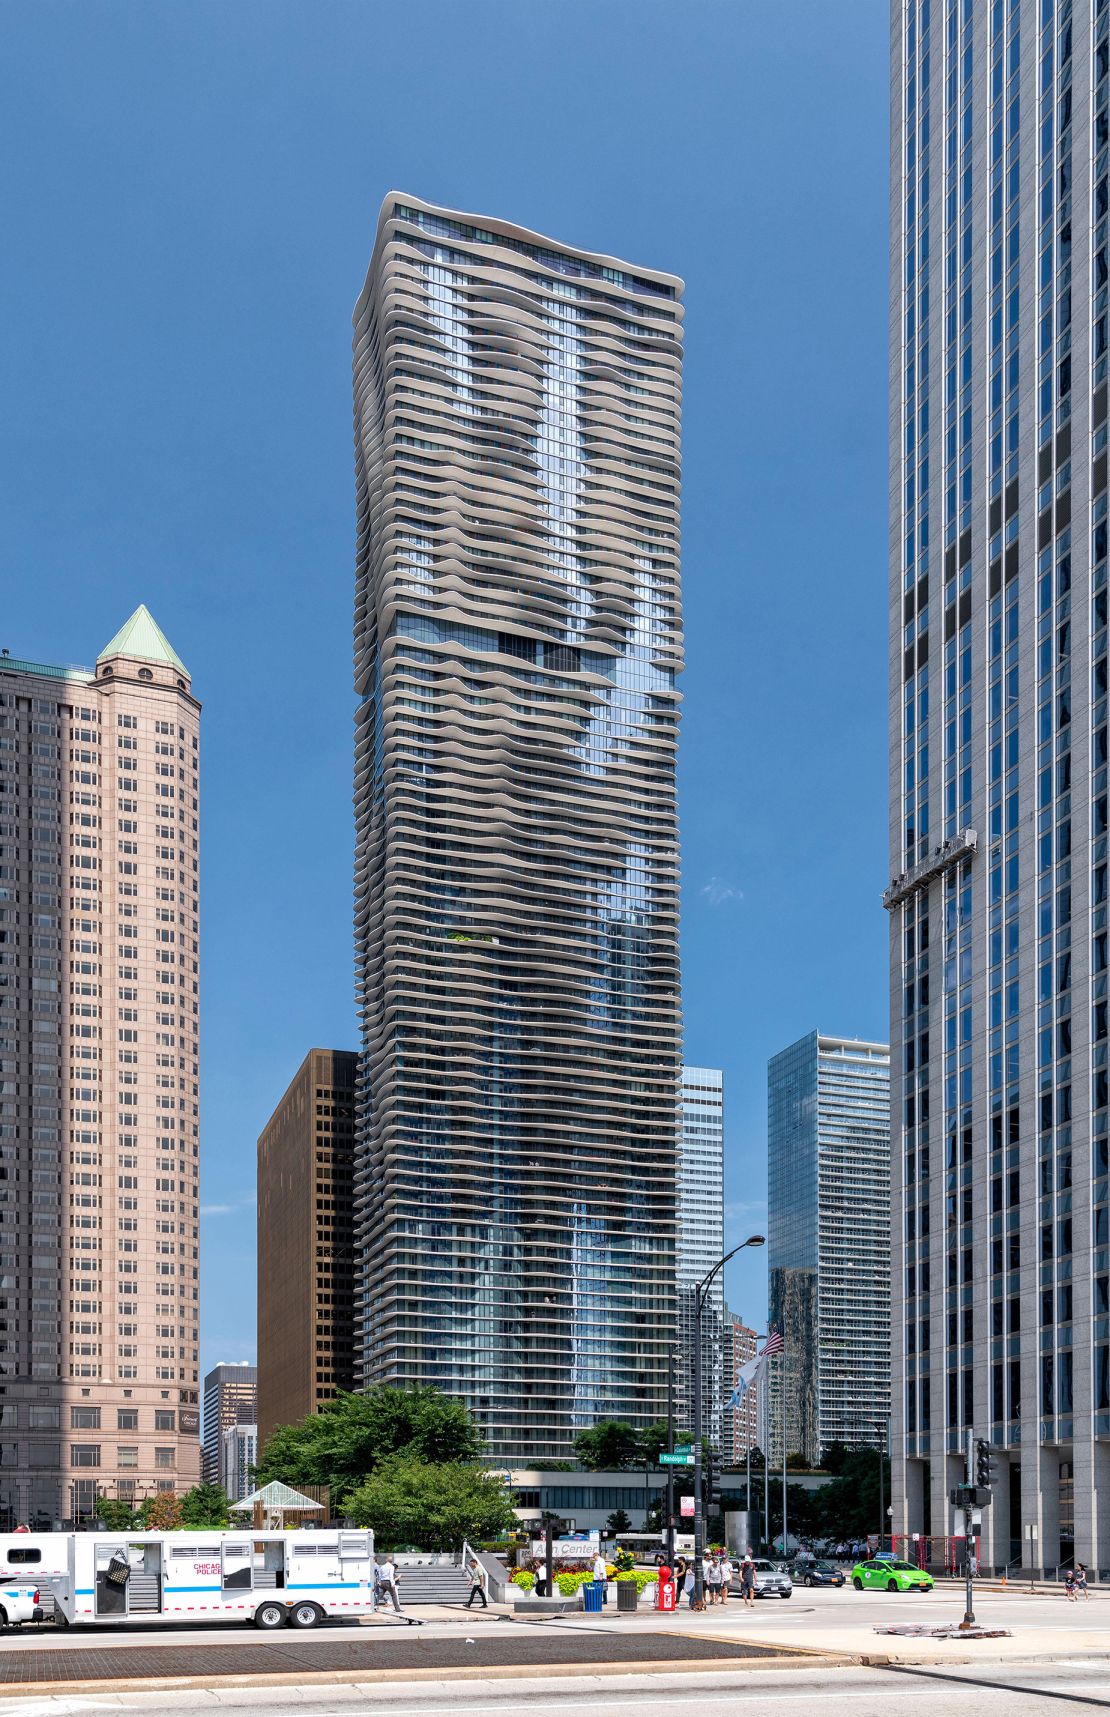 The facade of Chicago's Aqua Tower was, in part, designed to stop birds flying into the its windows.